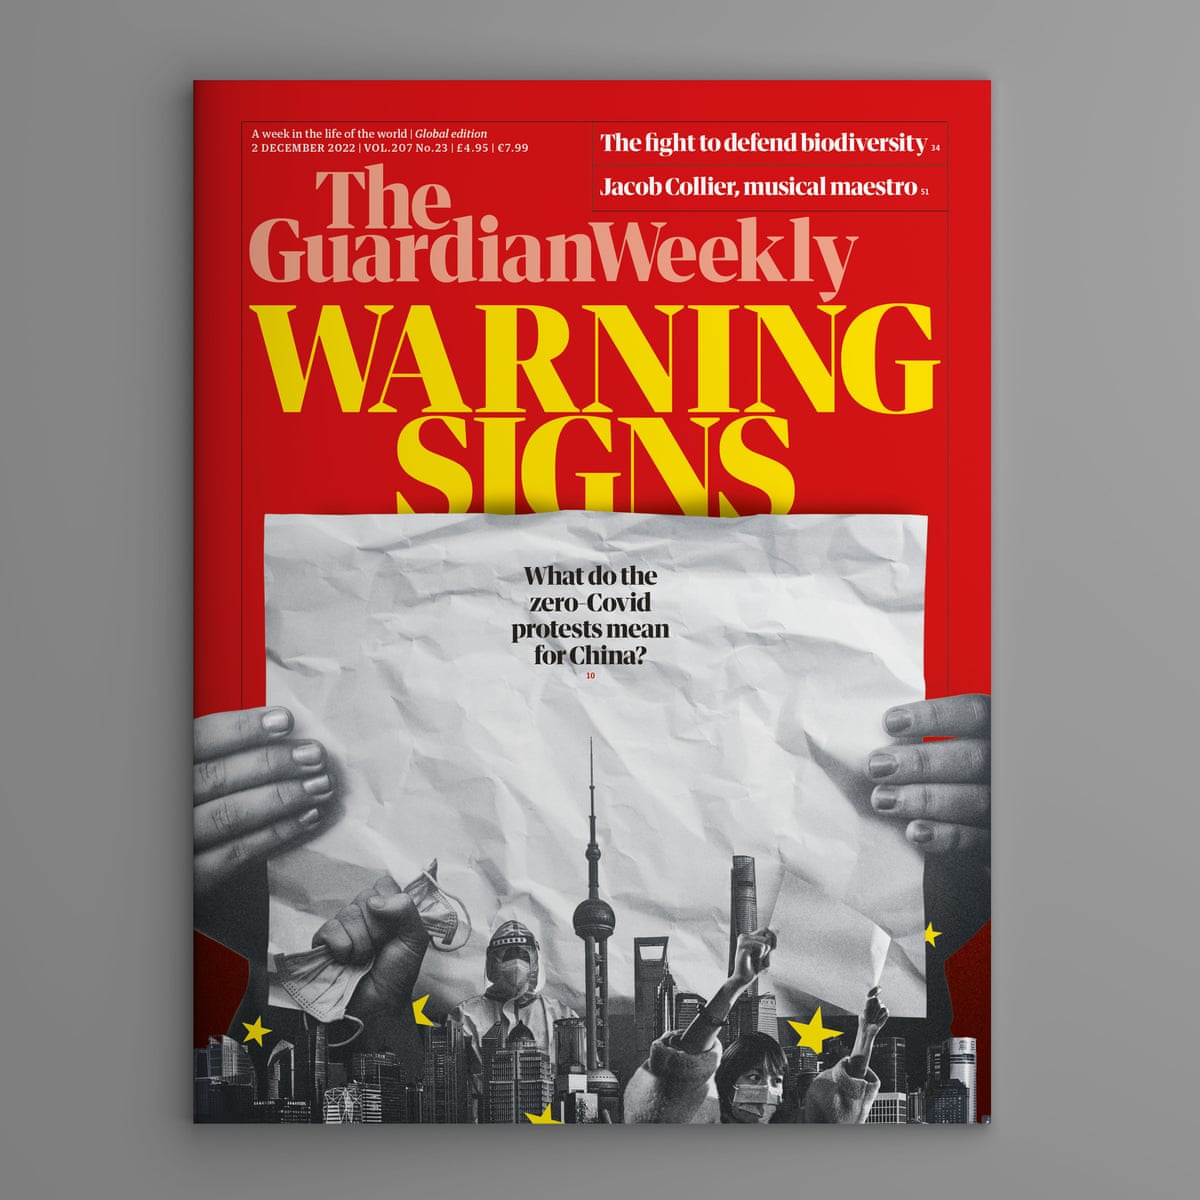 Warning signs: inside the 2 December Guardian Weekly | China | The Guardian